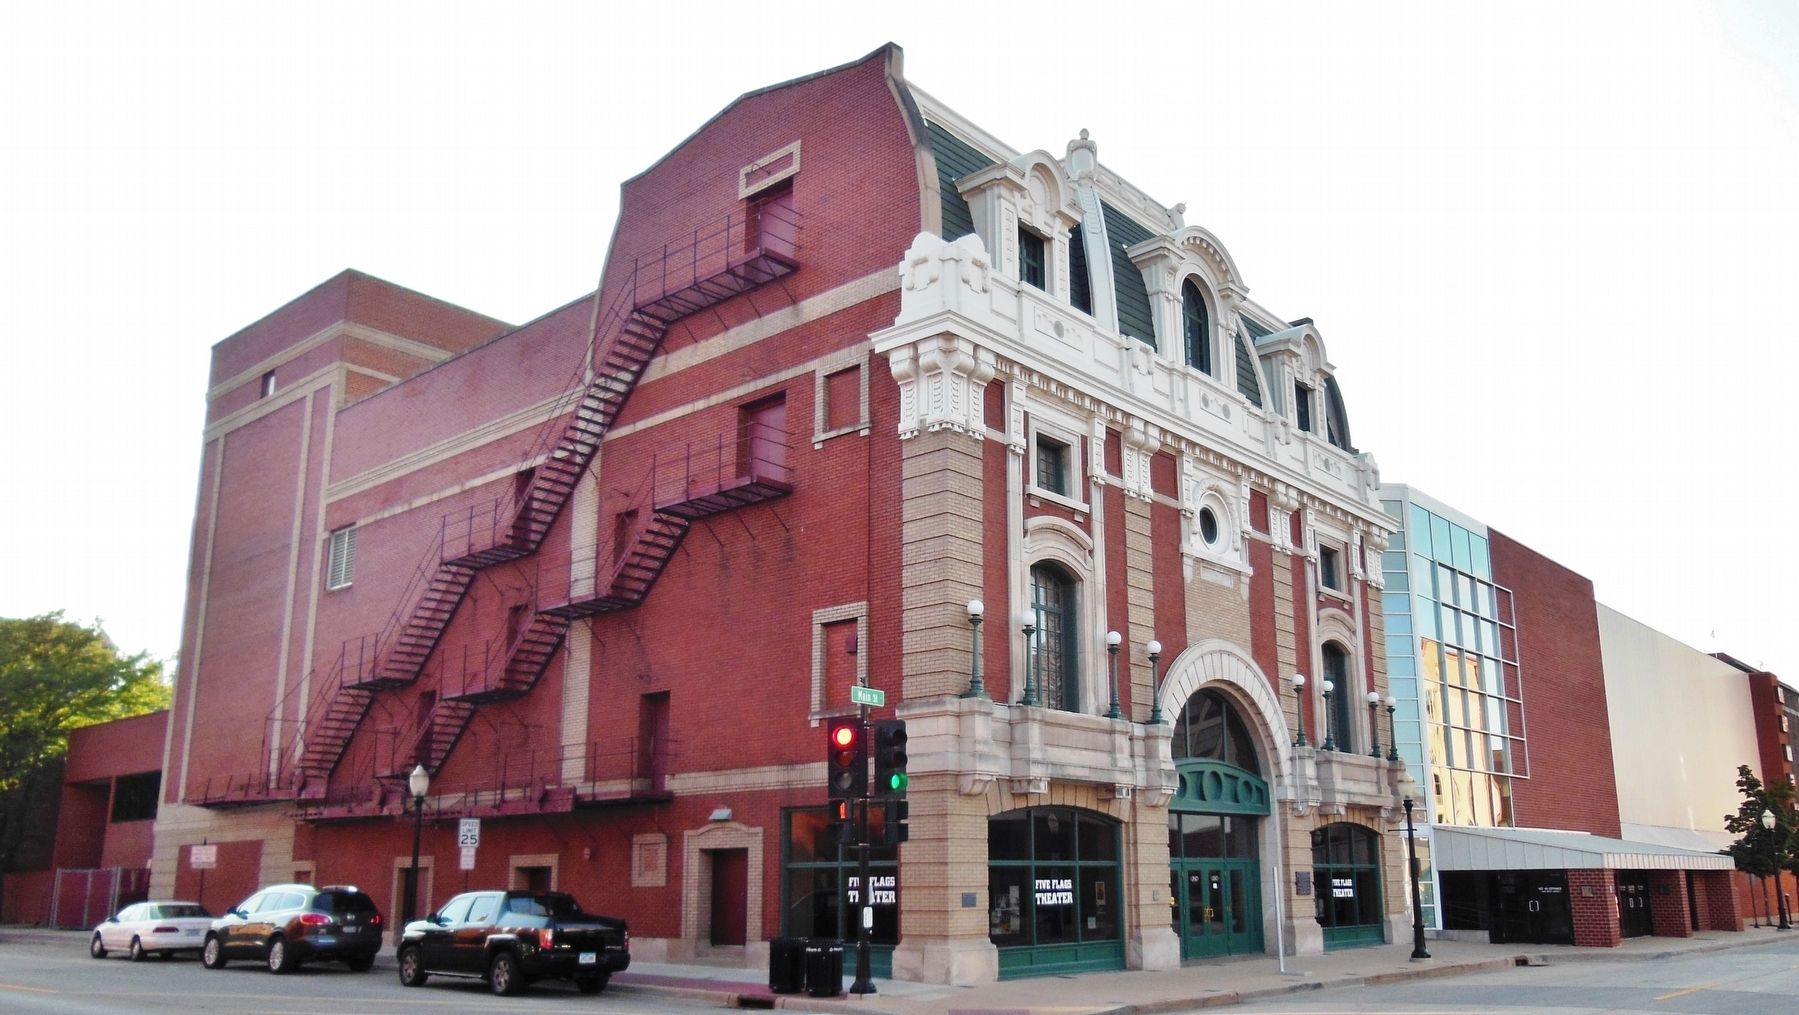 Five Flags Theater (<i>southeast corner view</i>) image. Click for full size.